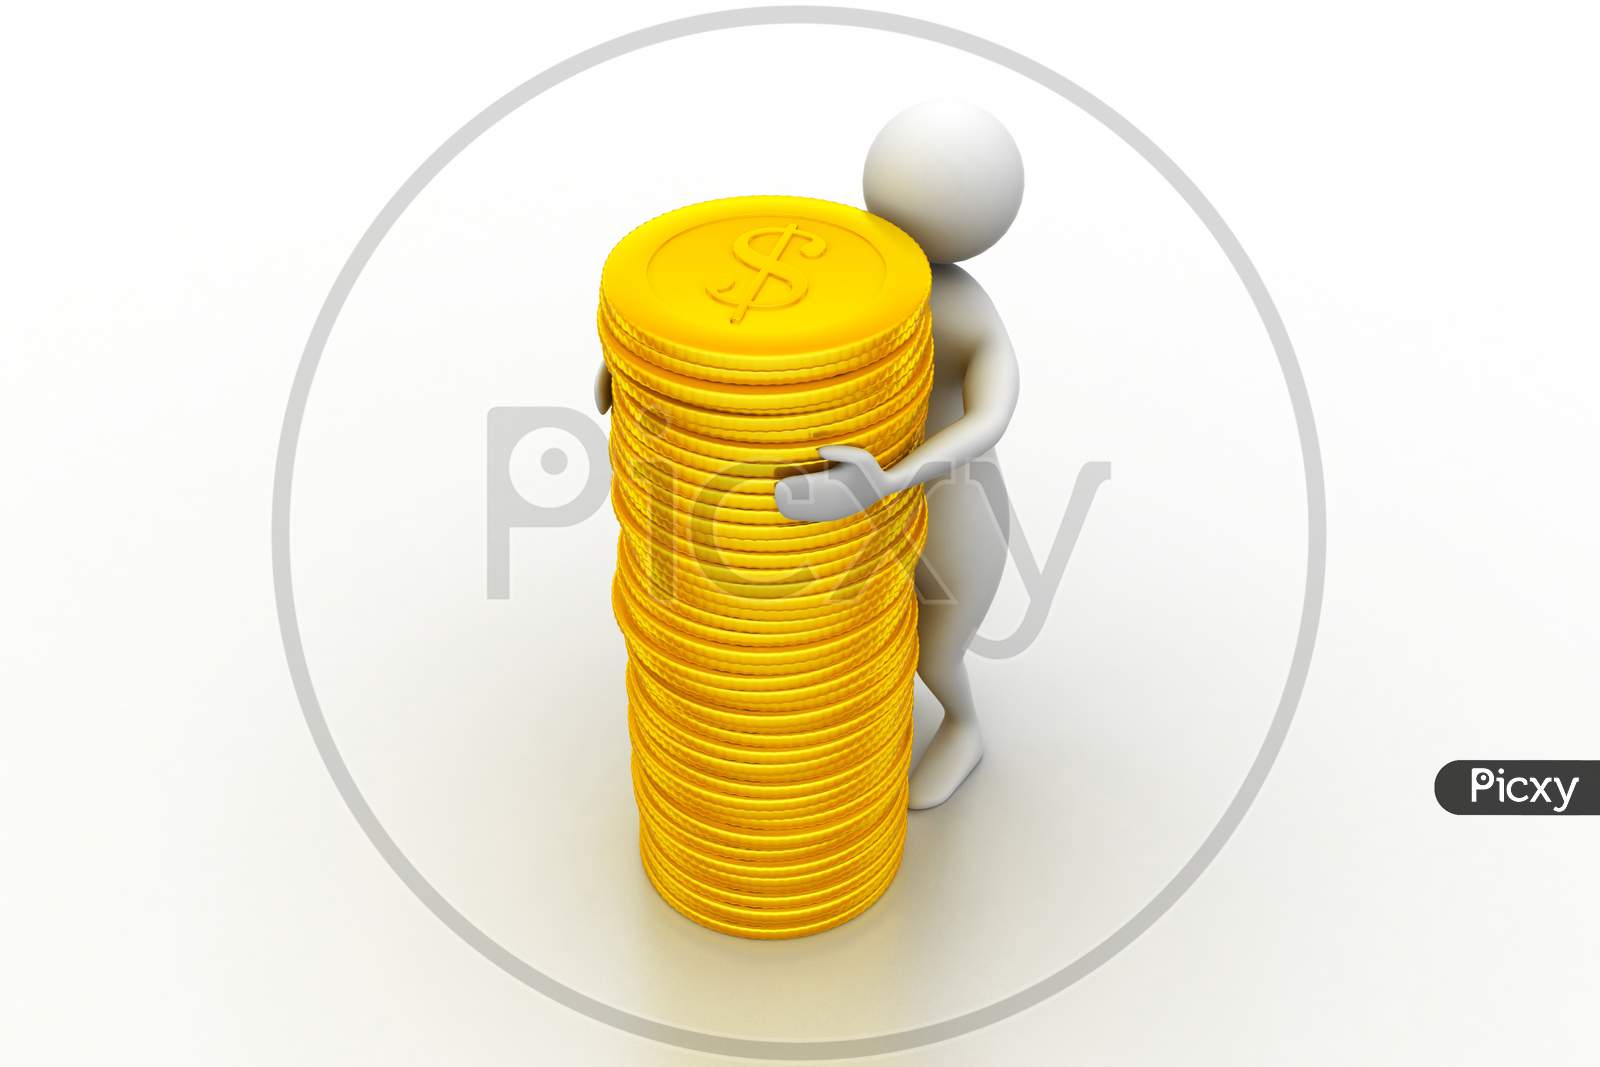 Gold Coin With 3D Person